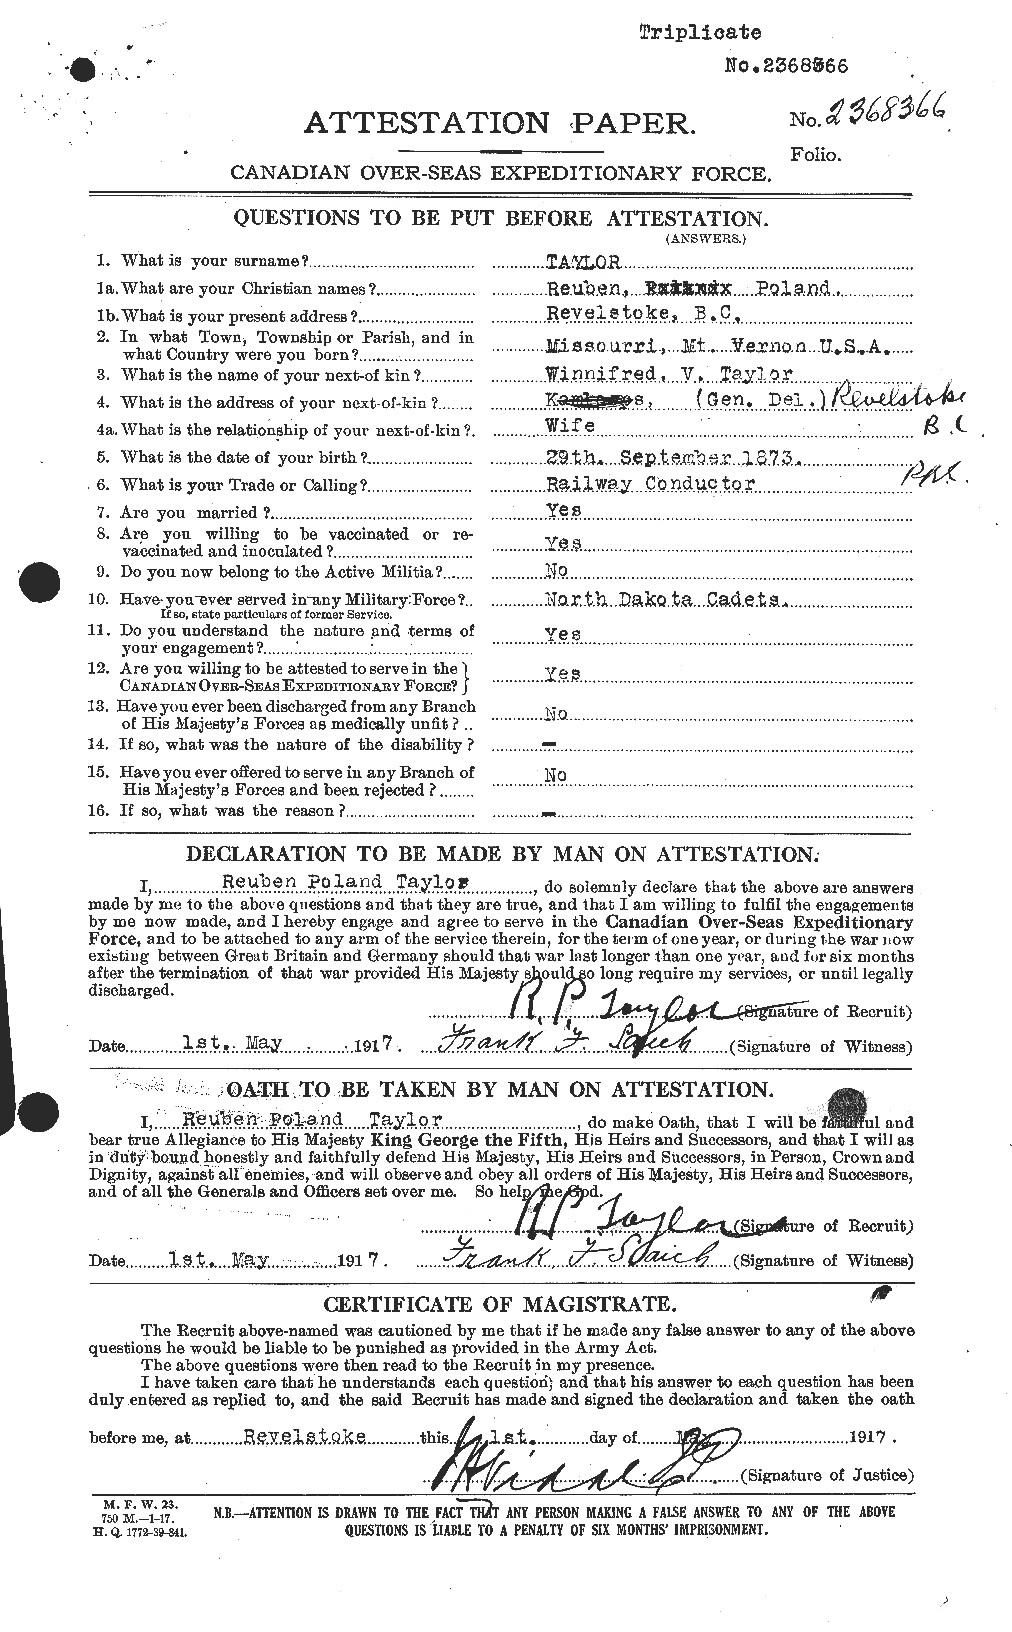 Personnel Records of the First World War - CEF 627811a